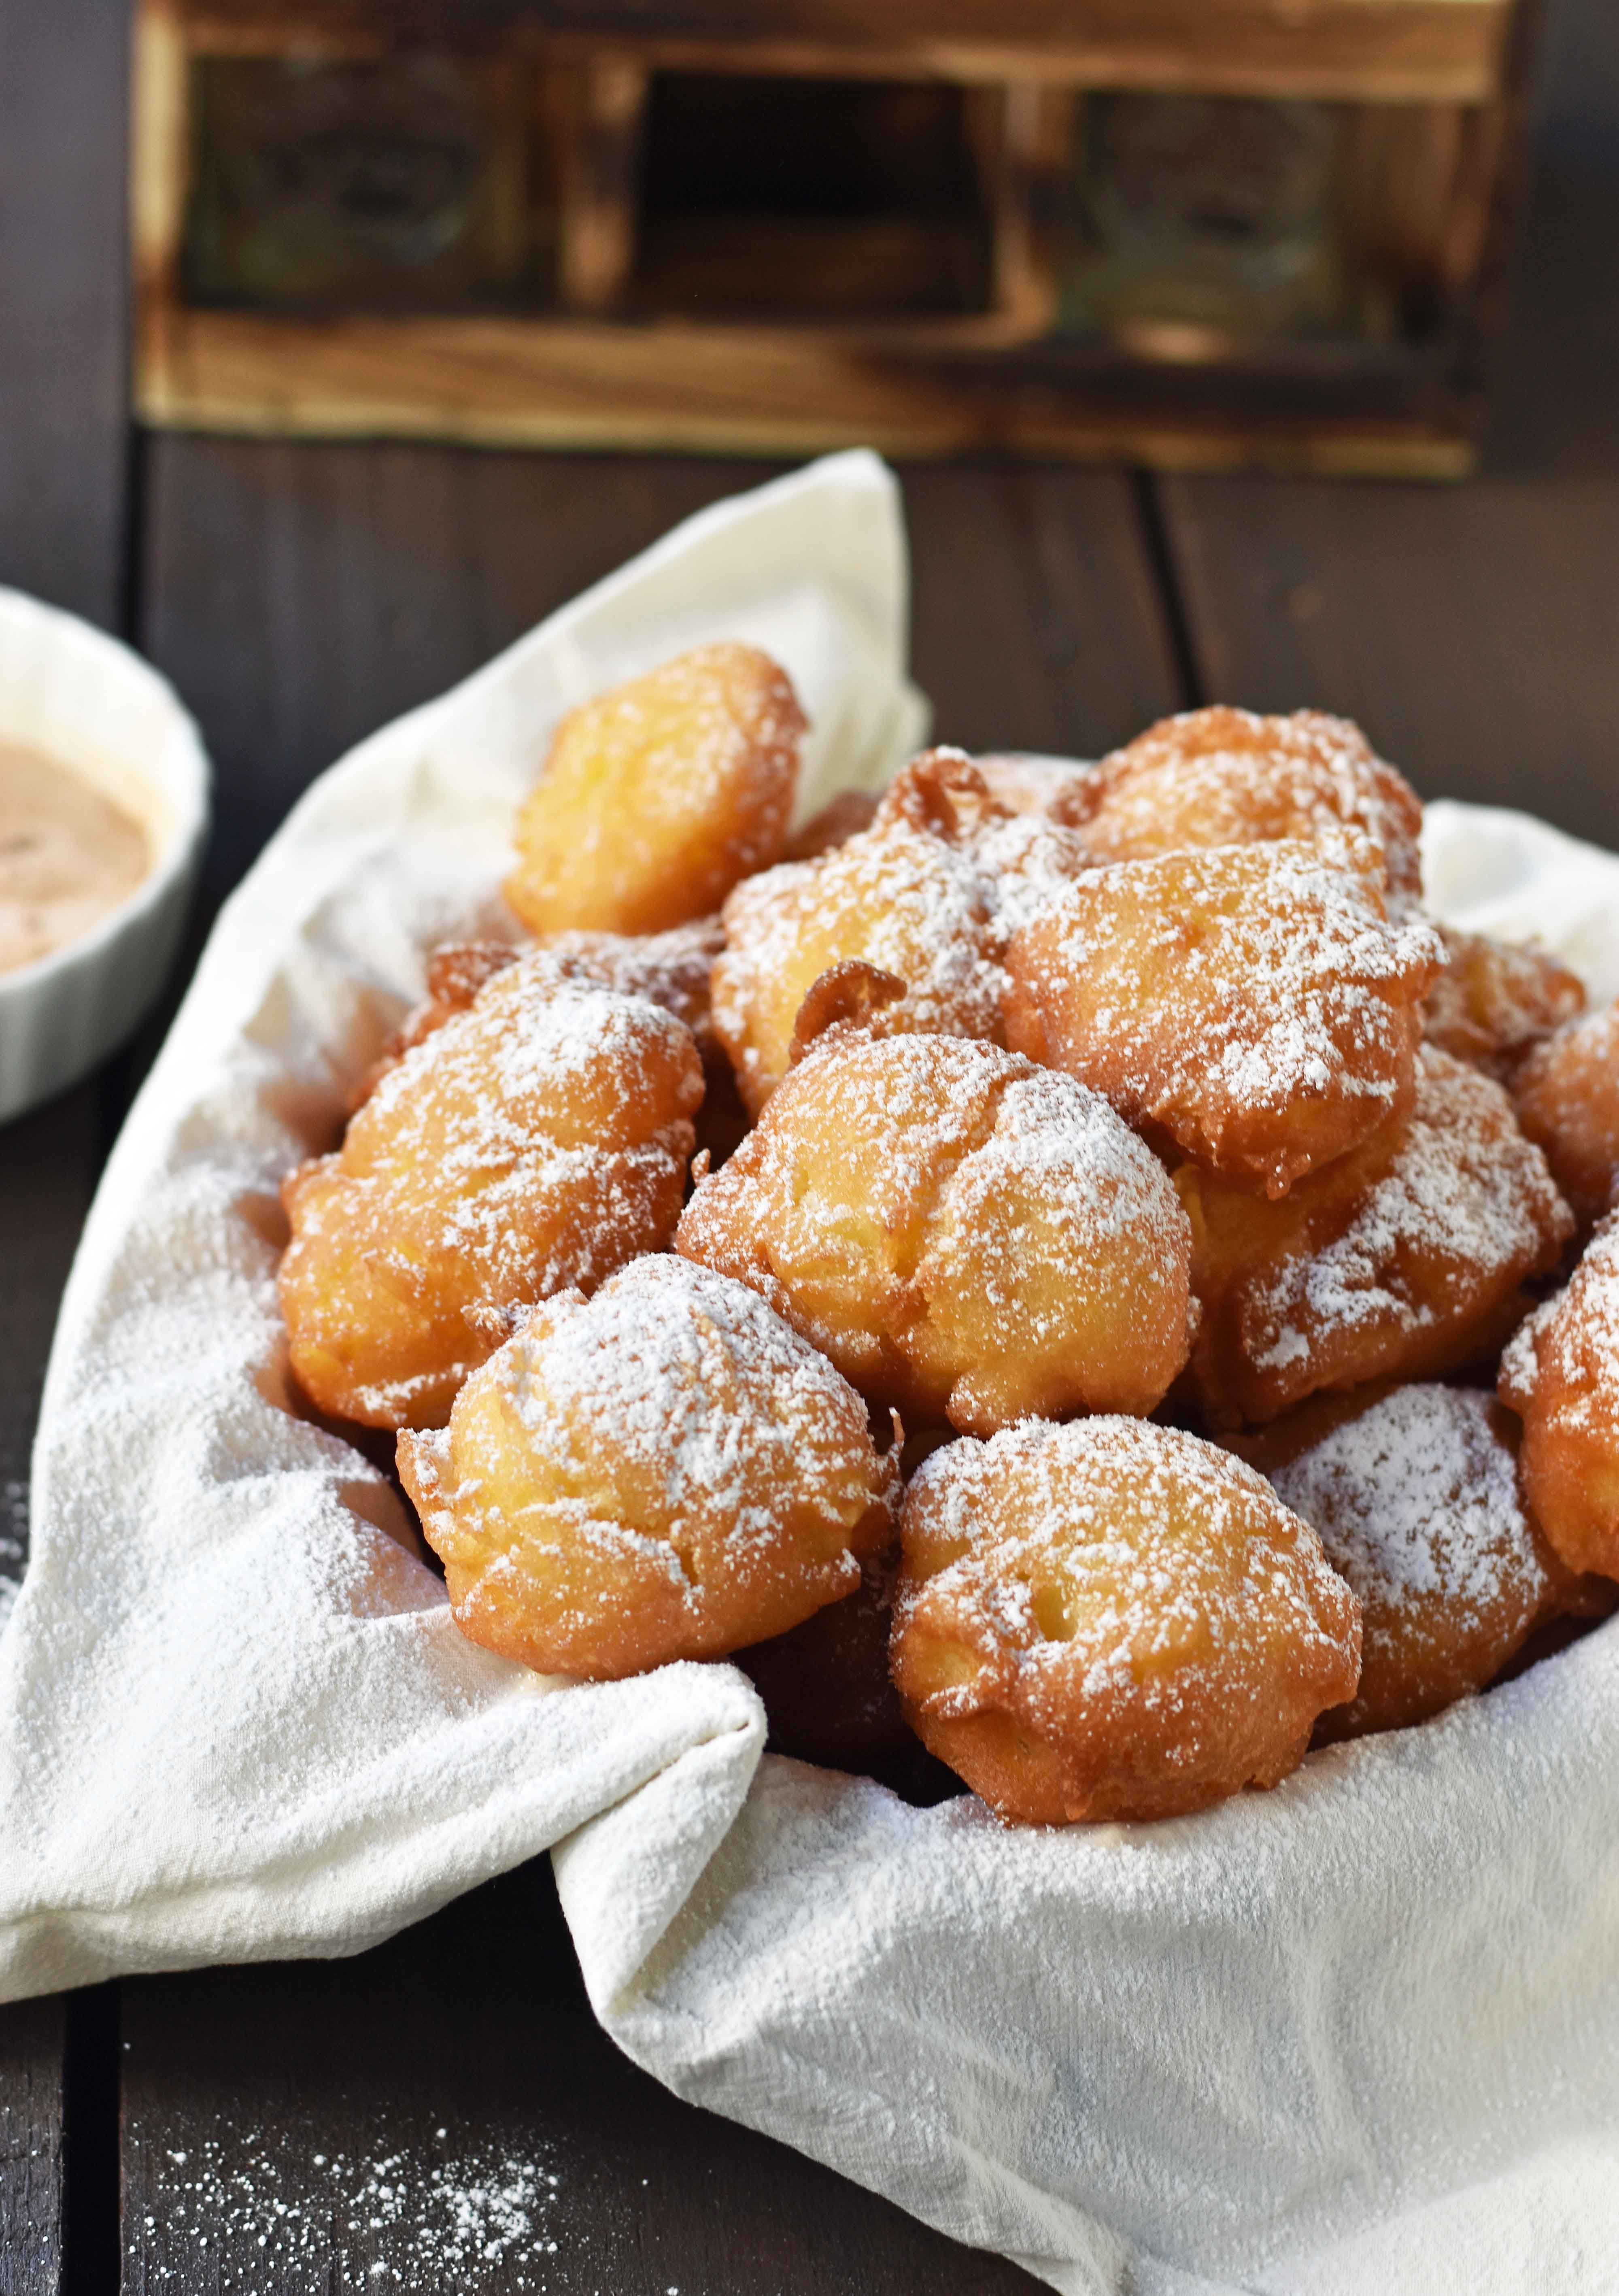 How to make quick and easy homemade apple fritters from scratch. A simple apple batter fried in oil and topped with powdered sugar, cinnamon sugar, or vanilla glaze. Can be dipped in homemade creme anglaise or pastry cream. A festive Fall dessert. www.modernhoney.com